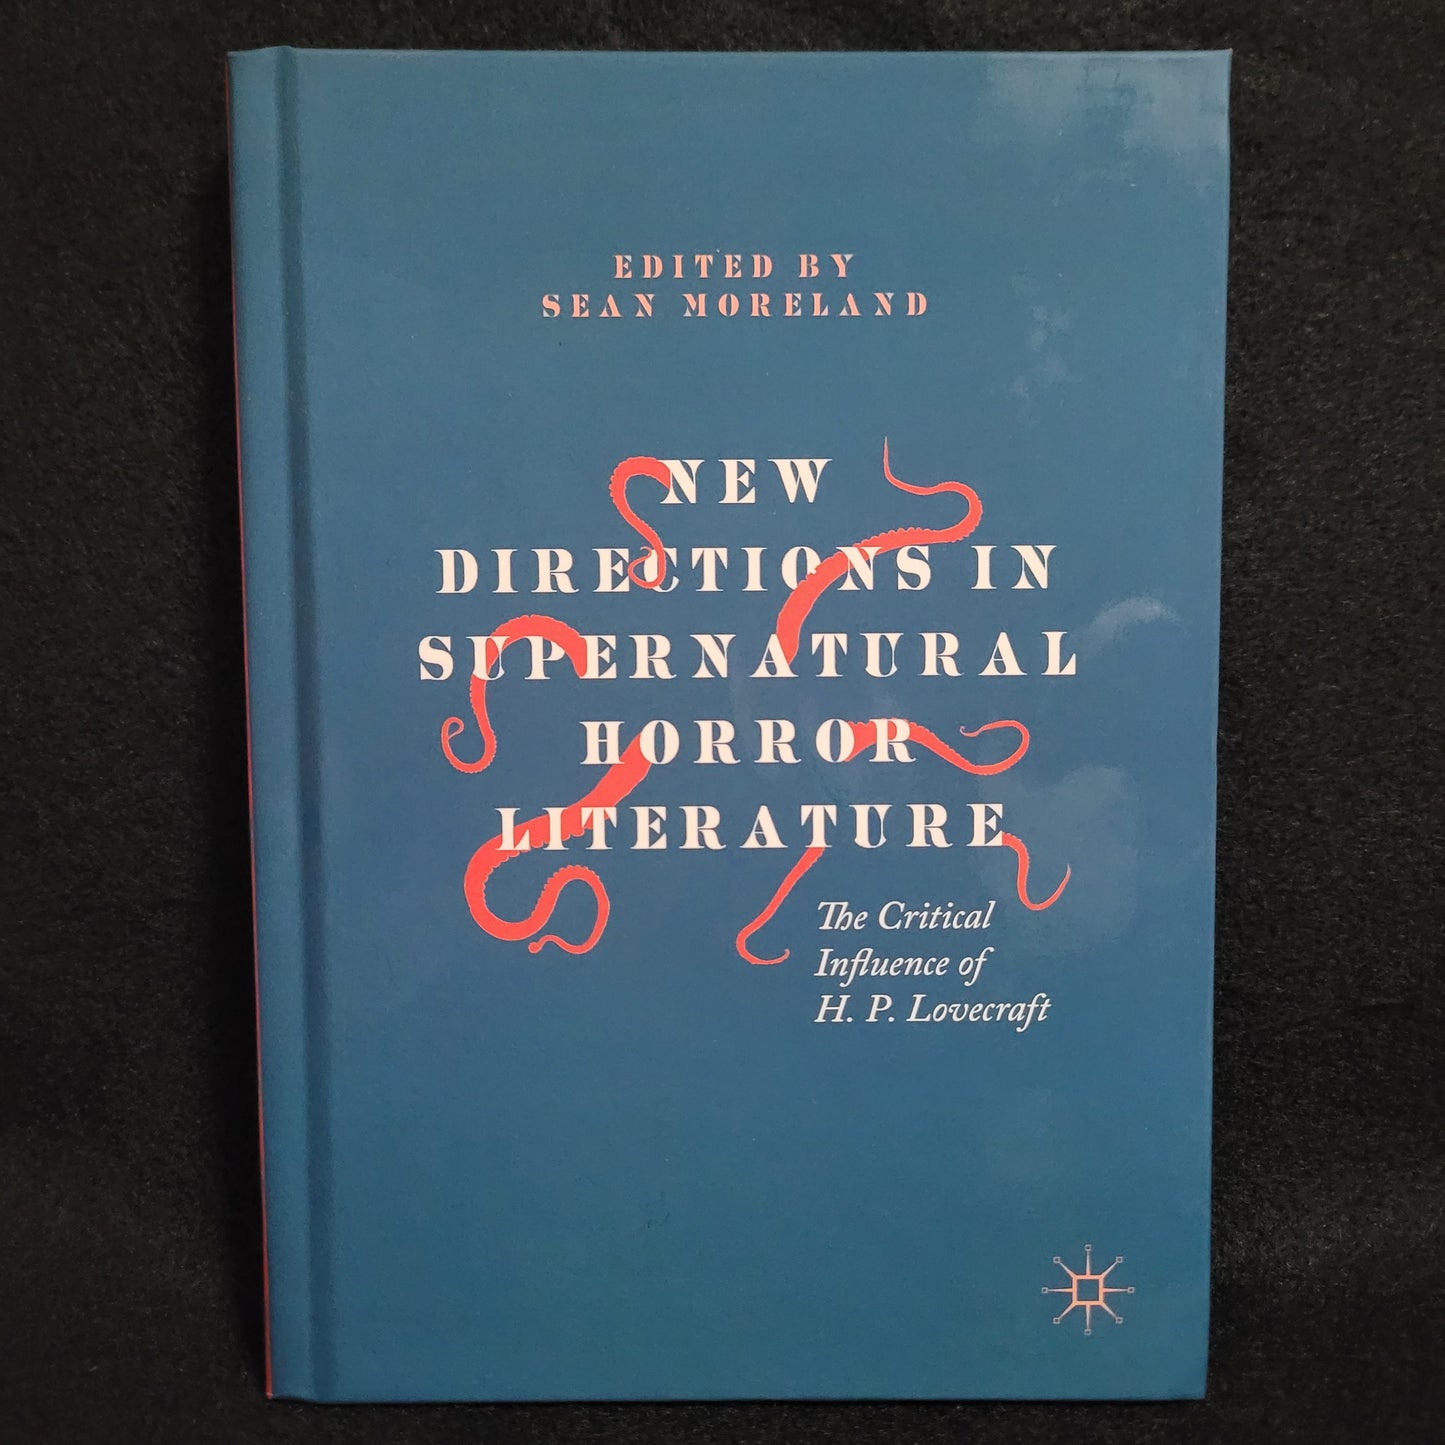 New Directions in Supernatural Horror Literature: The Critical Influence of H.P. Lovecraft (Palgrave Macmillan, 2018) Hardcover